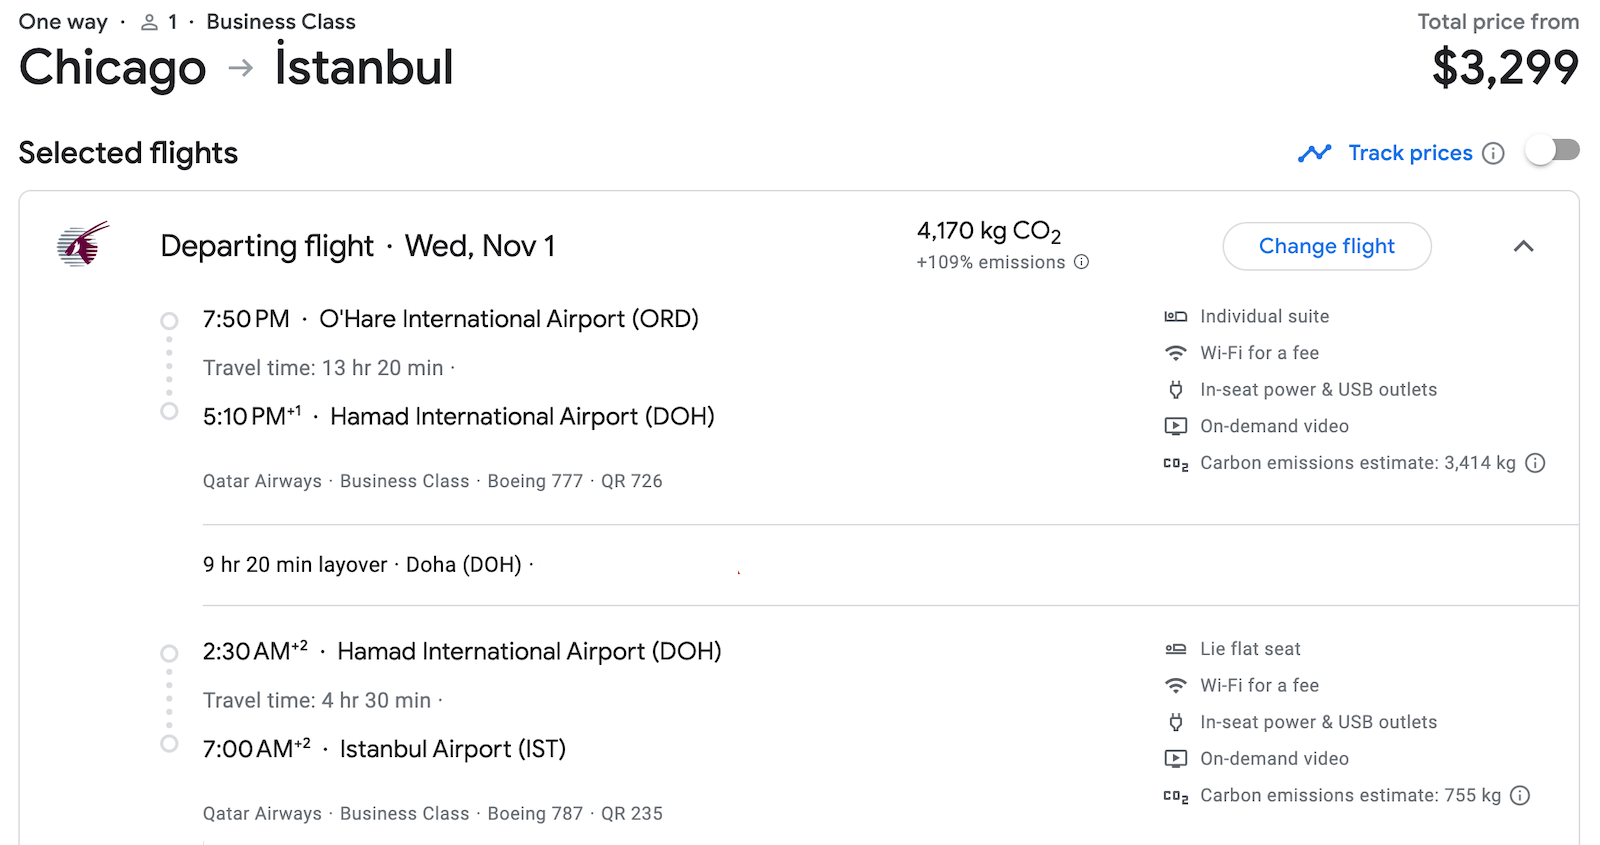 flight itinerary from Chicago to Istanbul via Doha with Qatar Airways